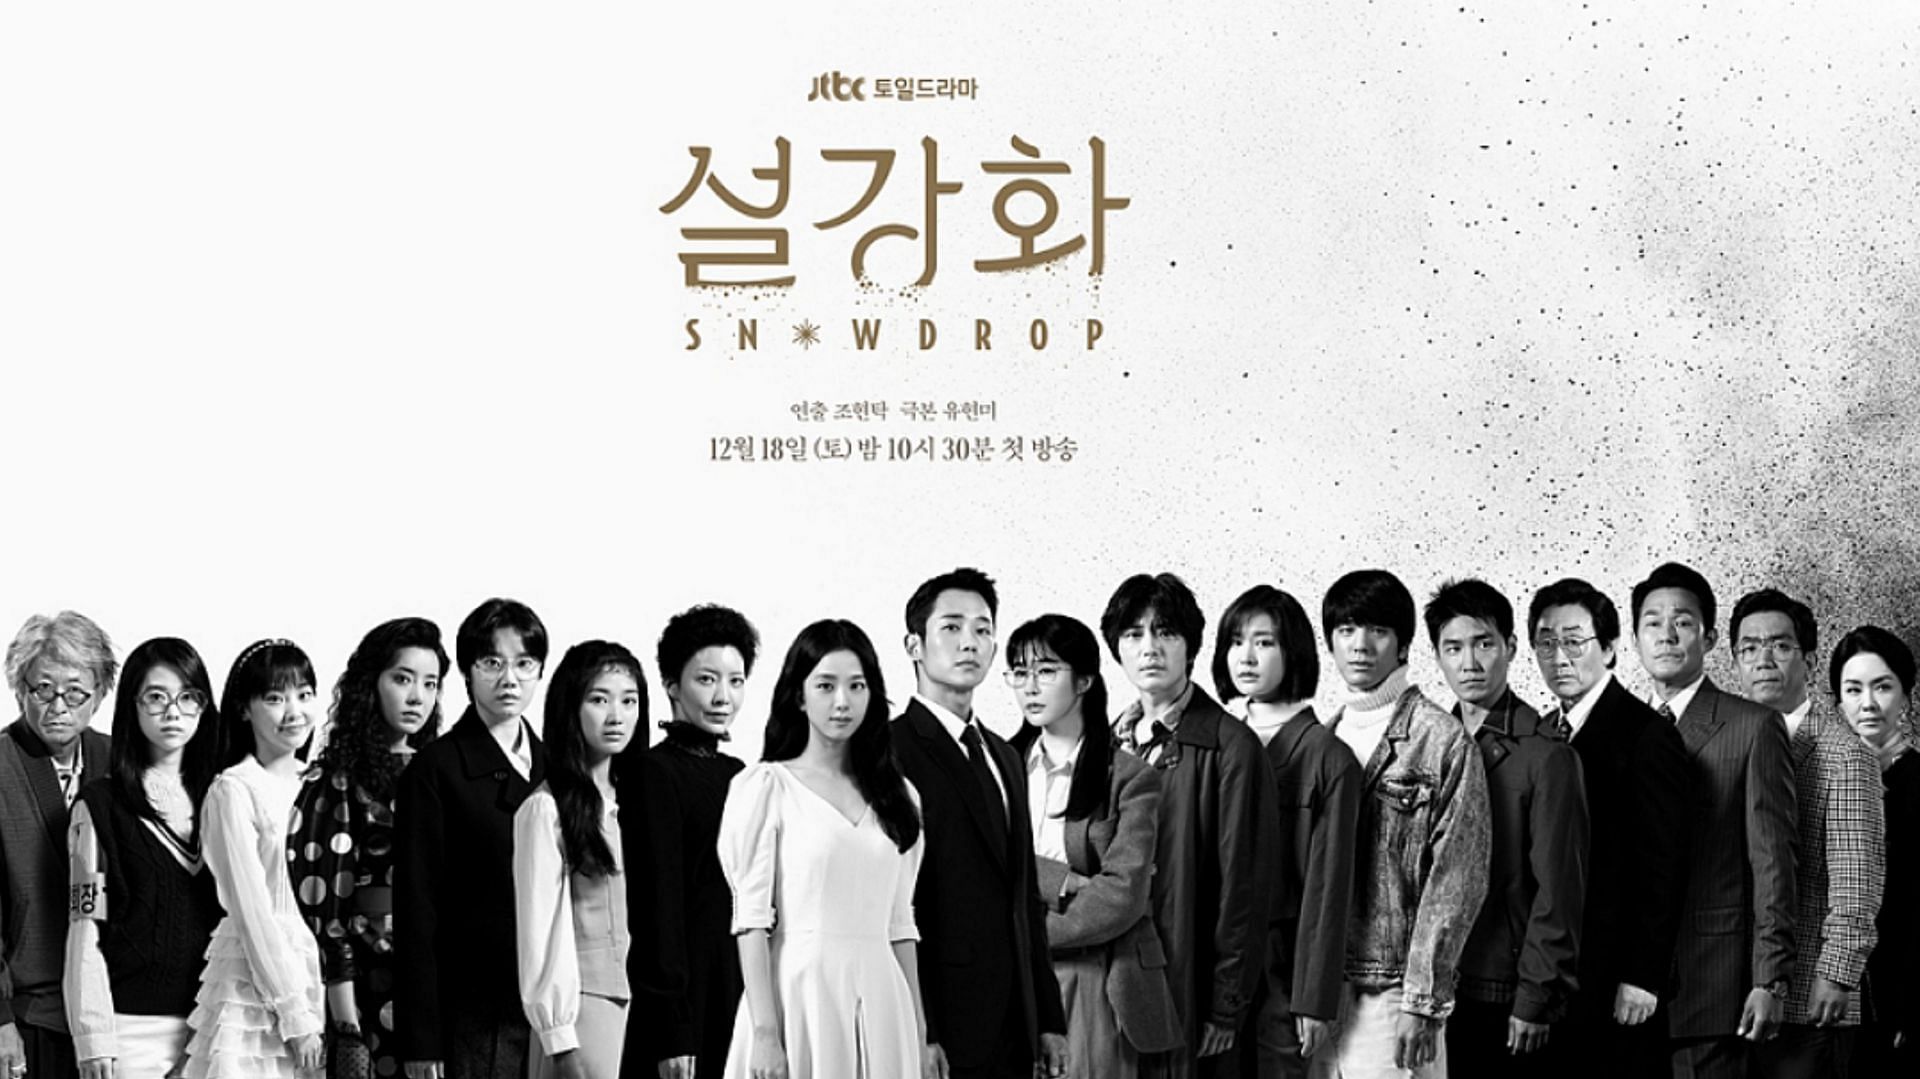 Snowdrop will be broadcast on Disney +, along with JTBC. (Image via JTBC)